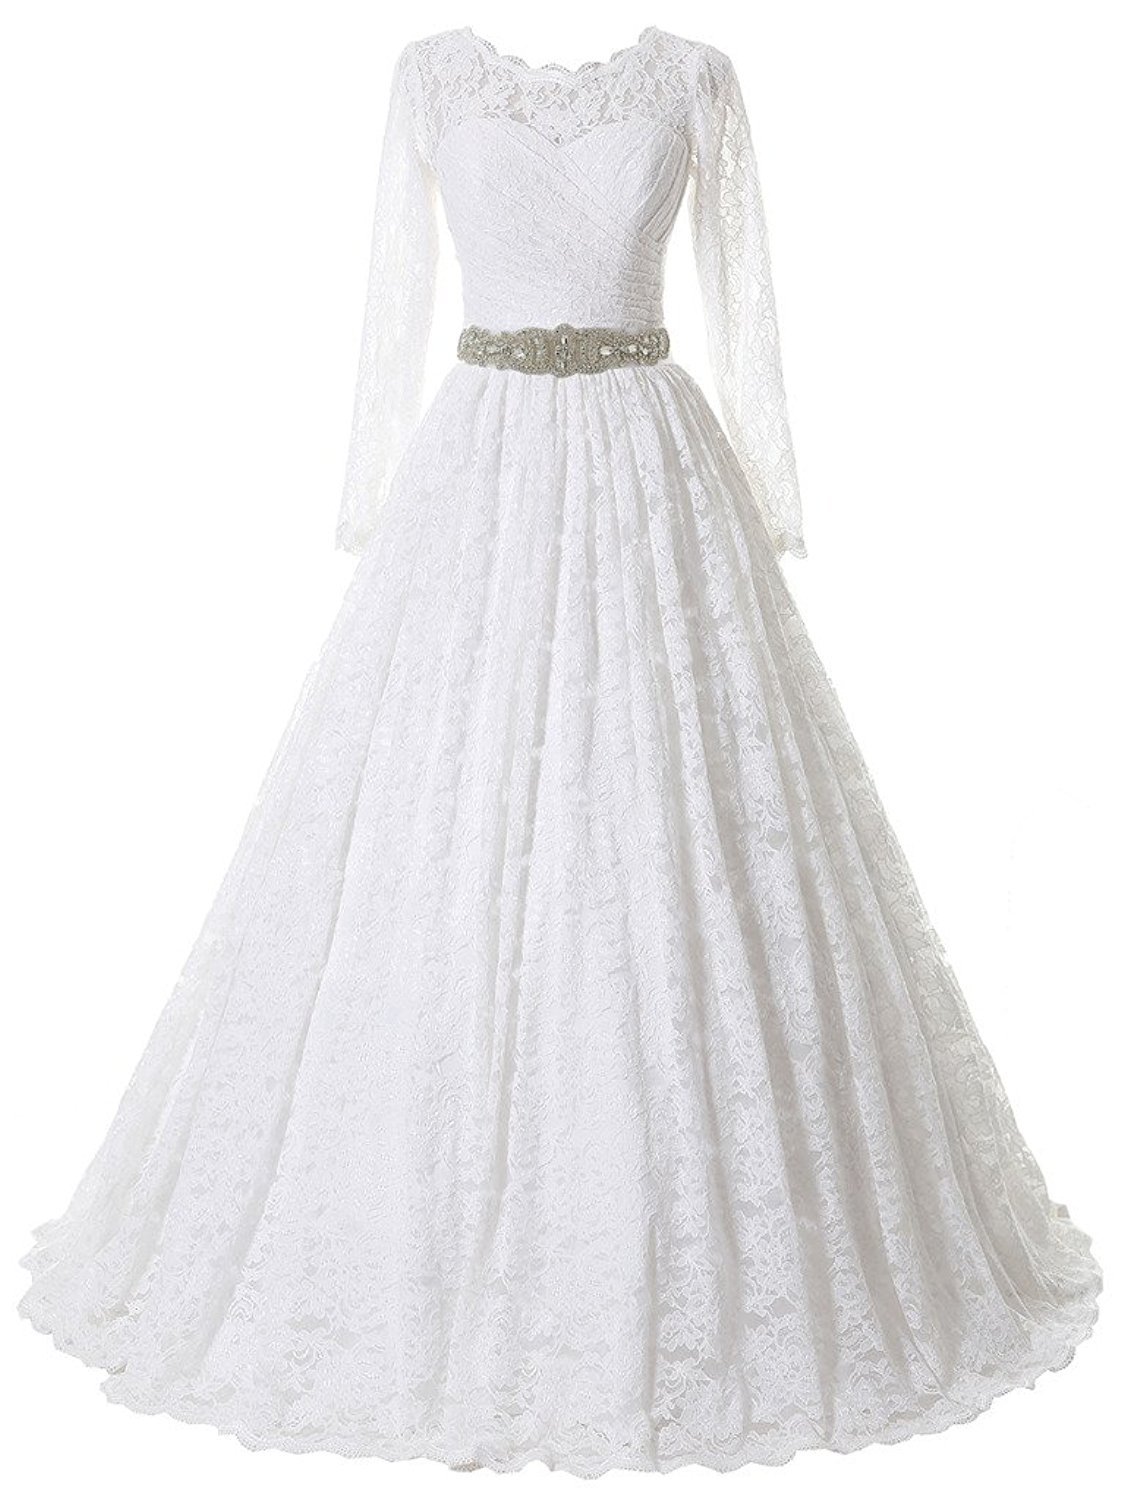 Long Sleeves Scoop Neck White Lace Wedding Dress Beaded Floor Length Women Bridal Gowns